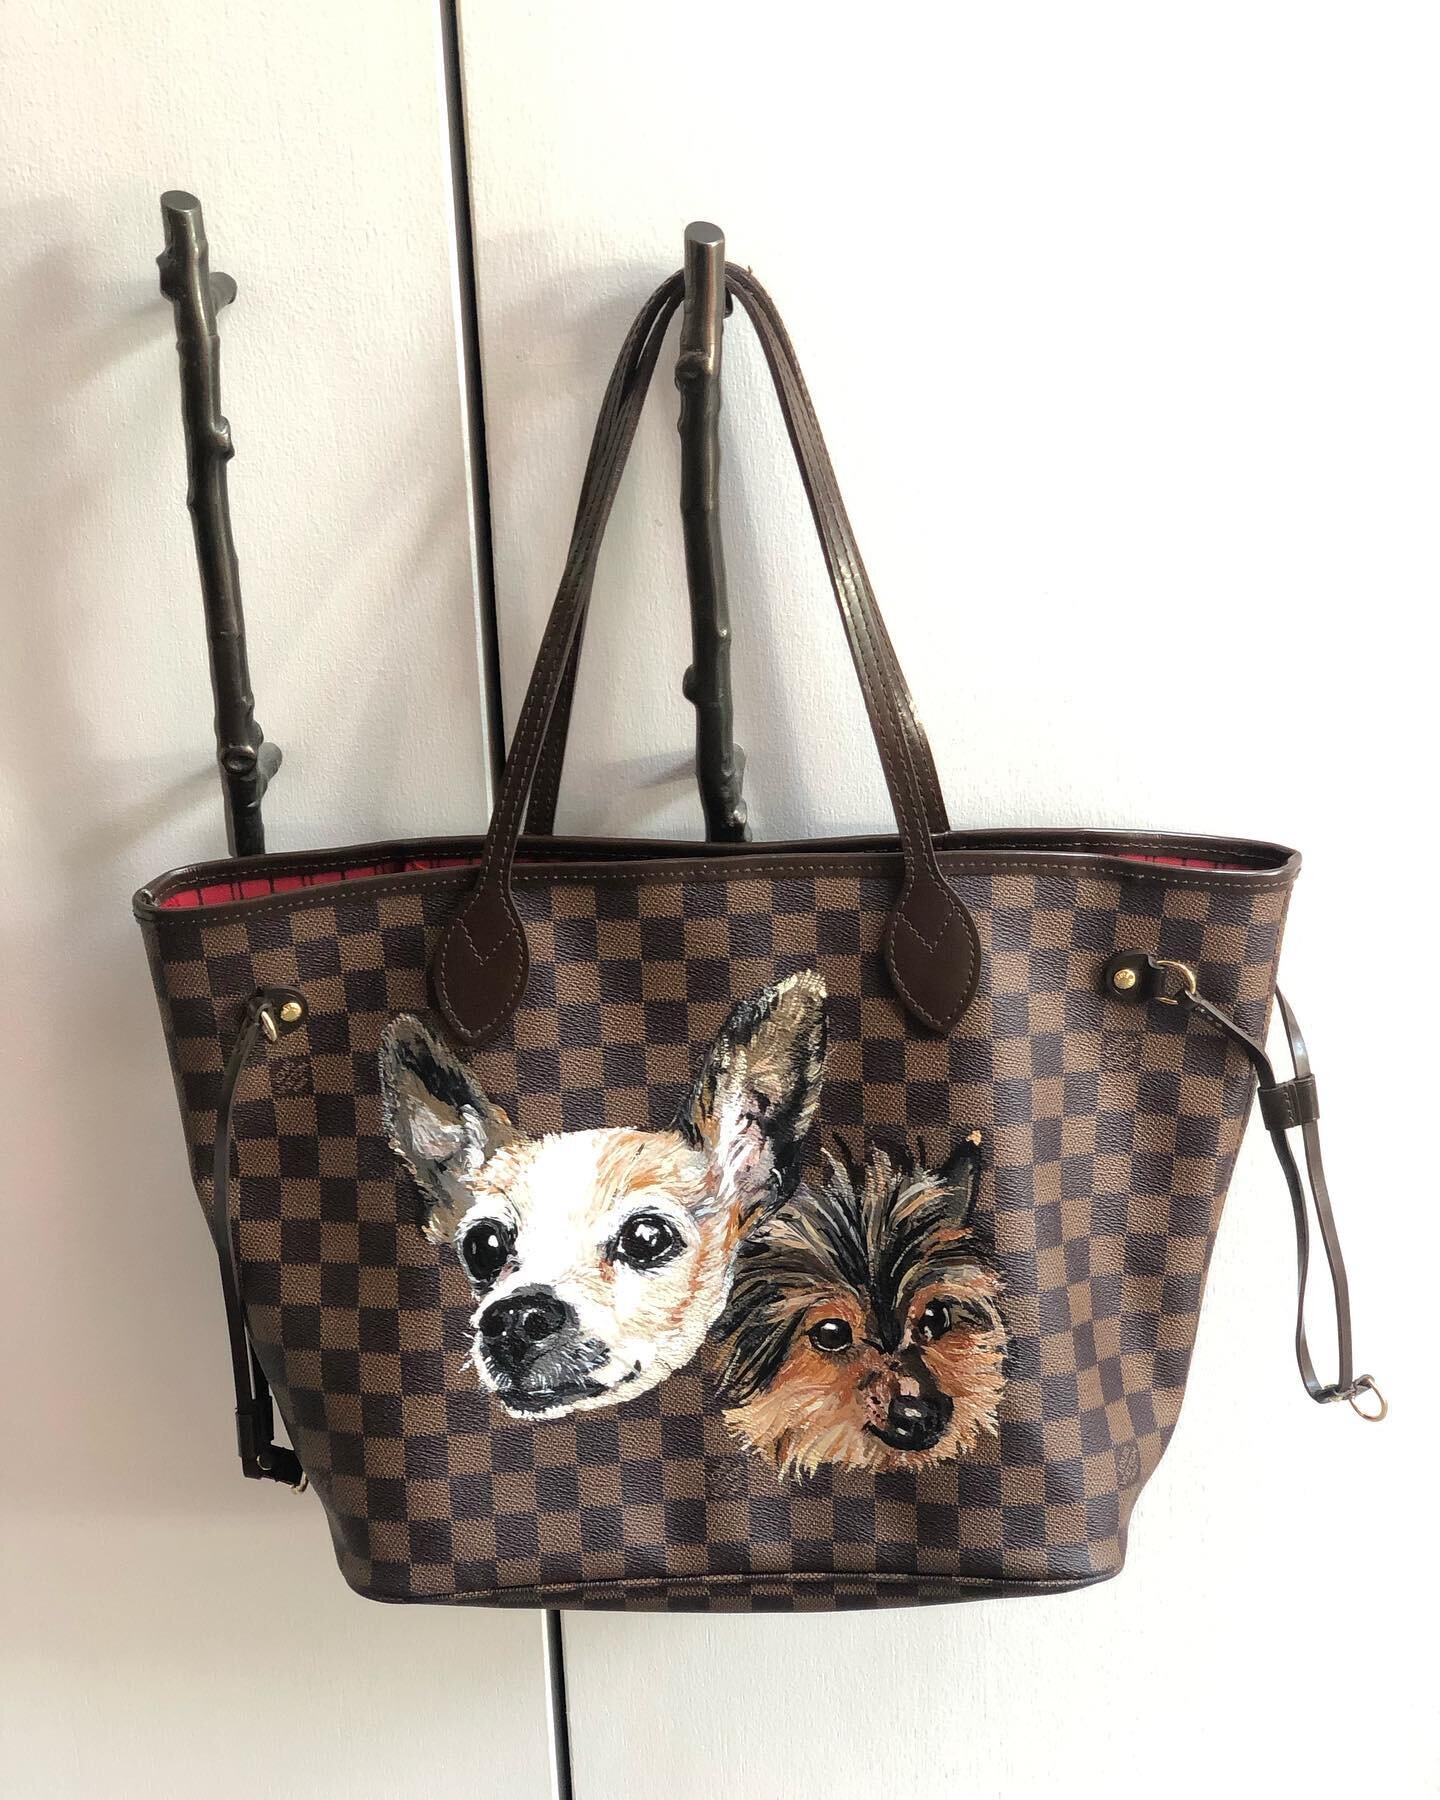 🐶🐶 #P&ecirc;t&agrave;Portrait 

#goldendudeleathers #dogsofinstagram #custom #handpainted #veganleather #madeinnyc #doglover #nyc #sustainableart #personalization #dogmom #lvneverfull #louisvuitton #louisvuittondog #dogs #upcycling #upcycle #upcycl